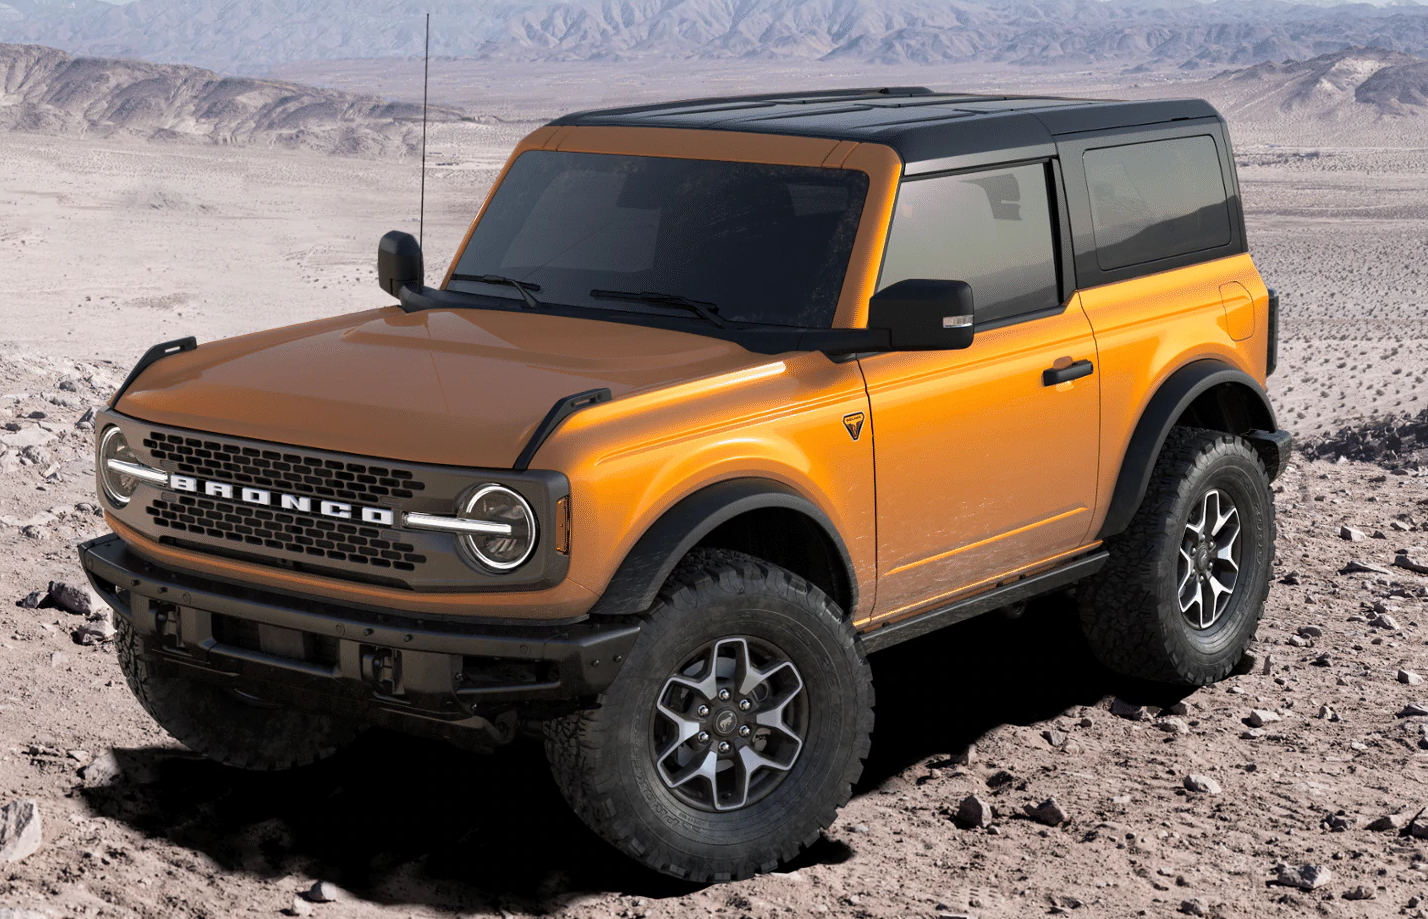 Ford Bronco Will Ford ever produce the elusive black modular top? 2021 Bronco